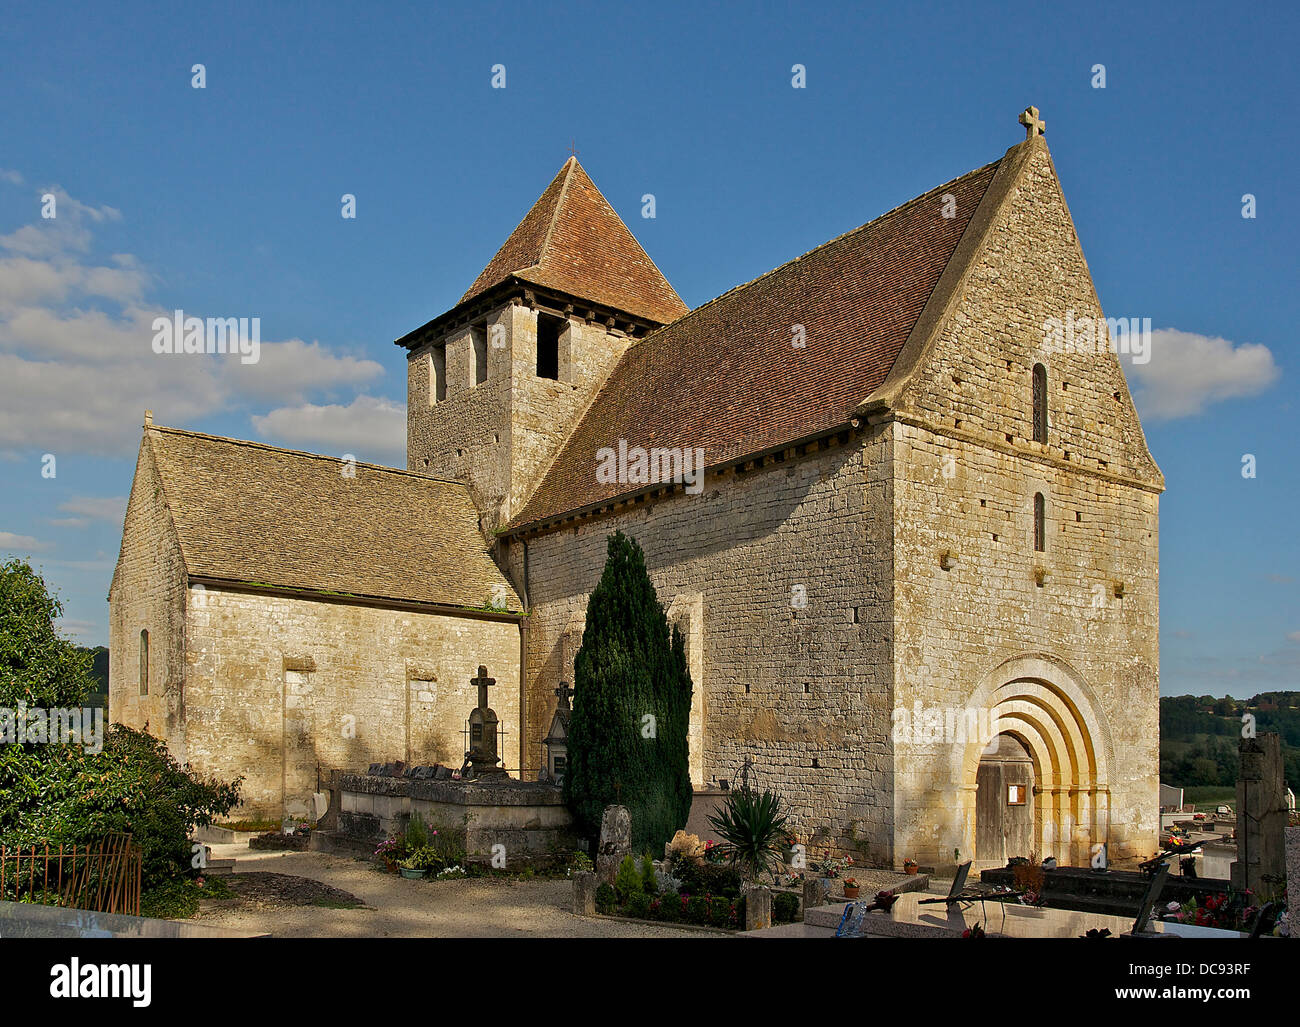 In Limeuil Dordogne, France, this 12th century Romanesque church and 13th & 14th centuries side chapel. Roof built in lauze sto Stock Photo